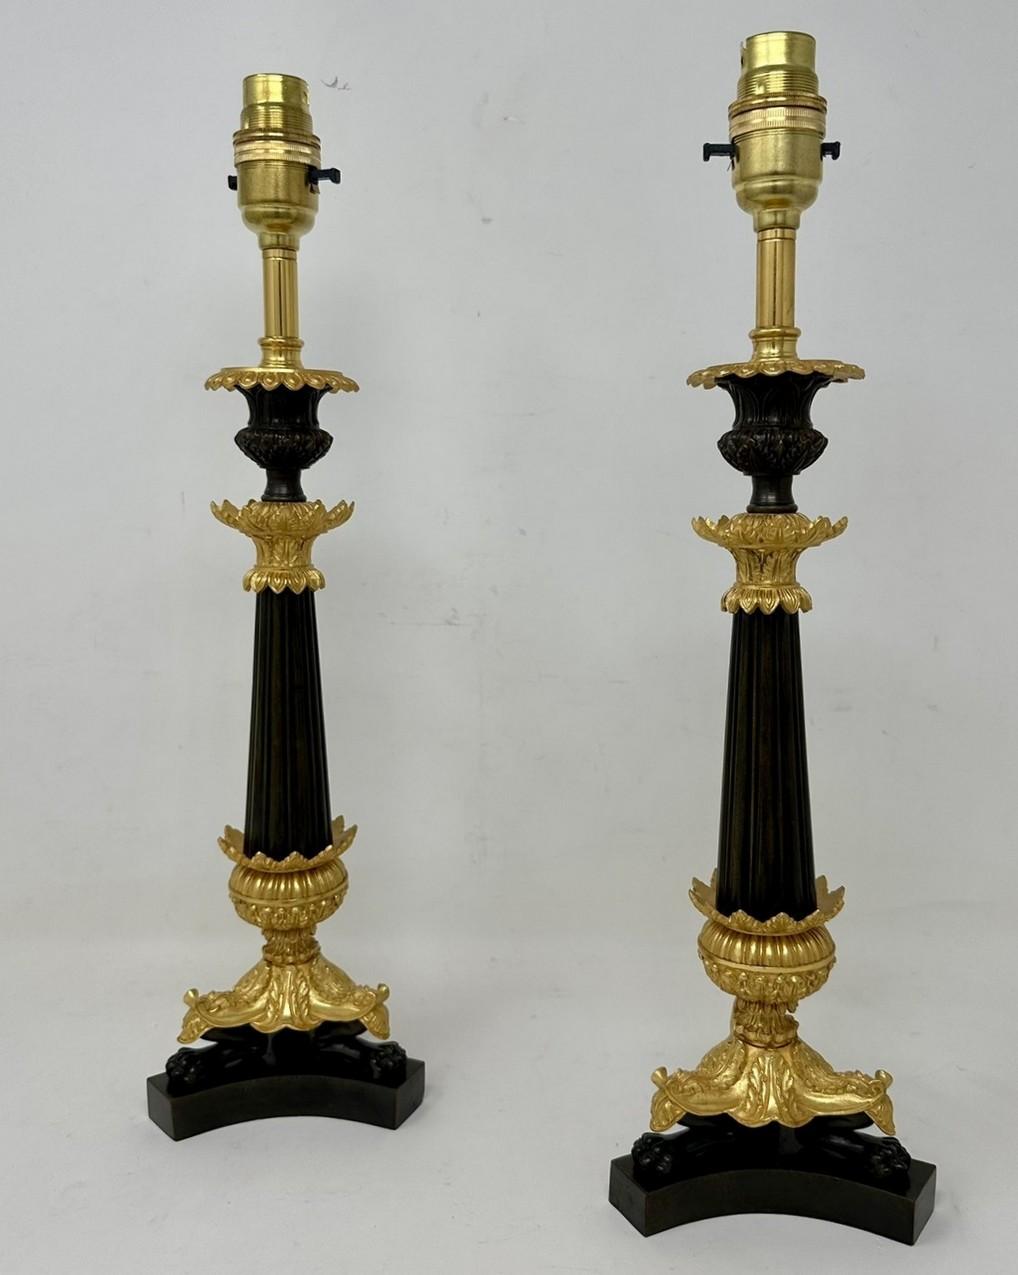 Stunning Identical Pair French Heavy Gauge Ormolu and Bronzed Single Light Candlesticks of average size proportions, now converted to a Pair of Electric Table Lamps, with tapering reeded central bronzed column, each ending with three very ornate